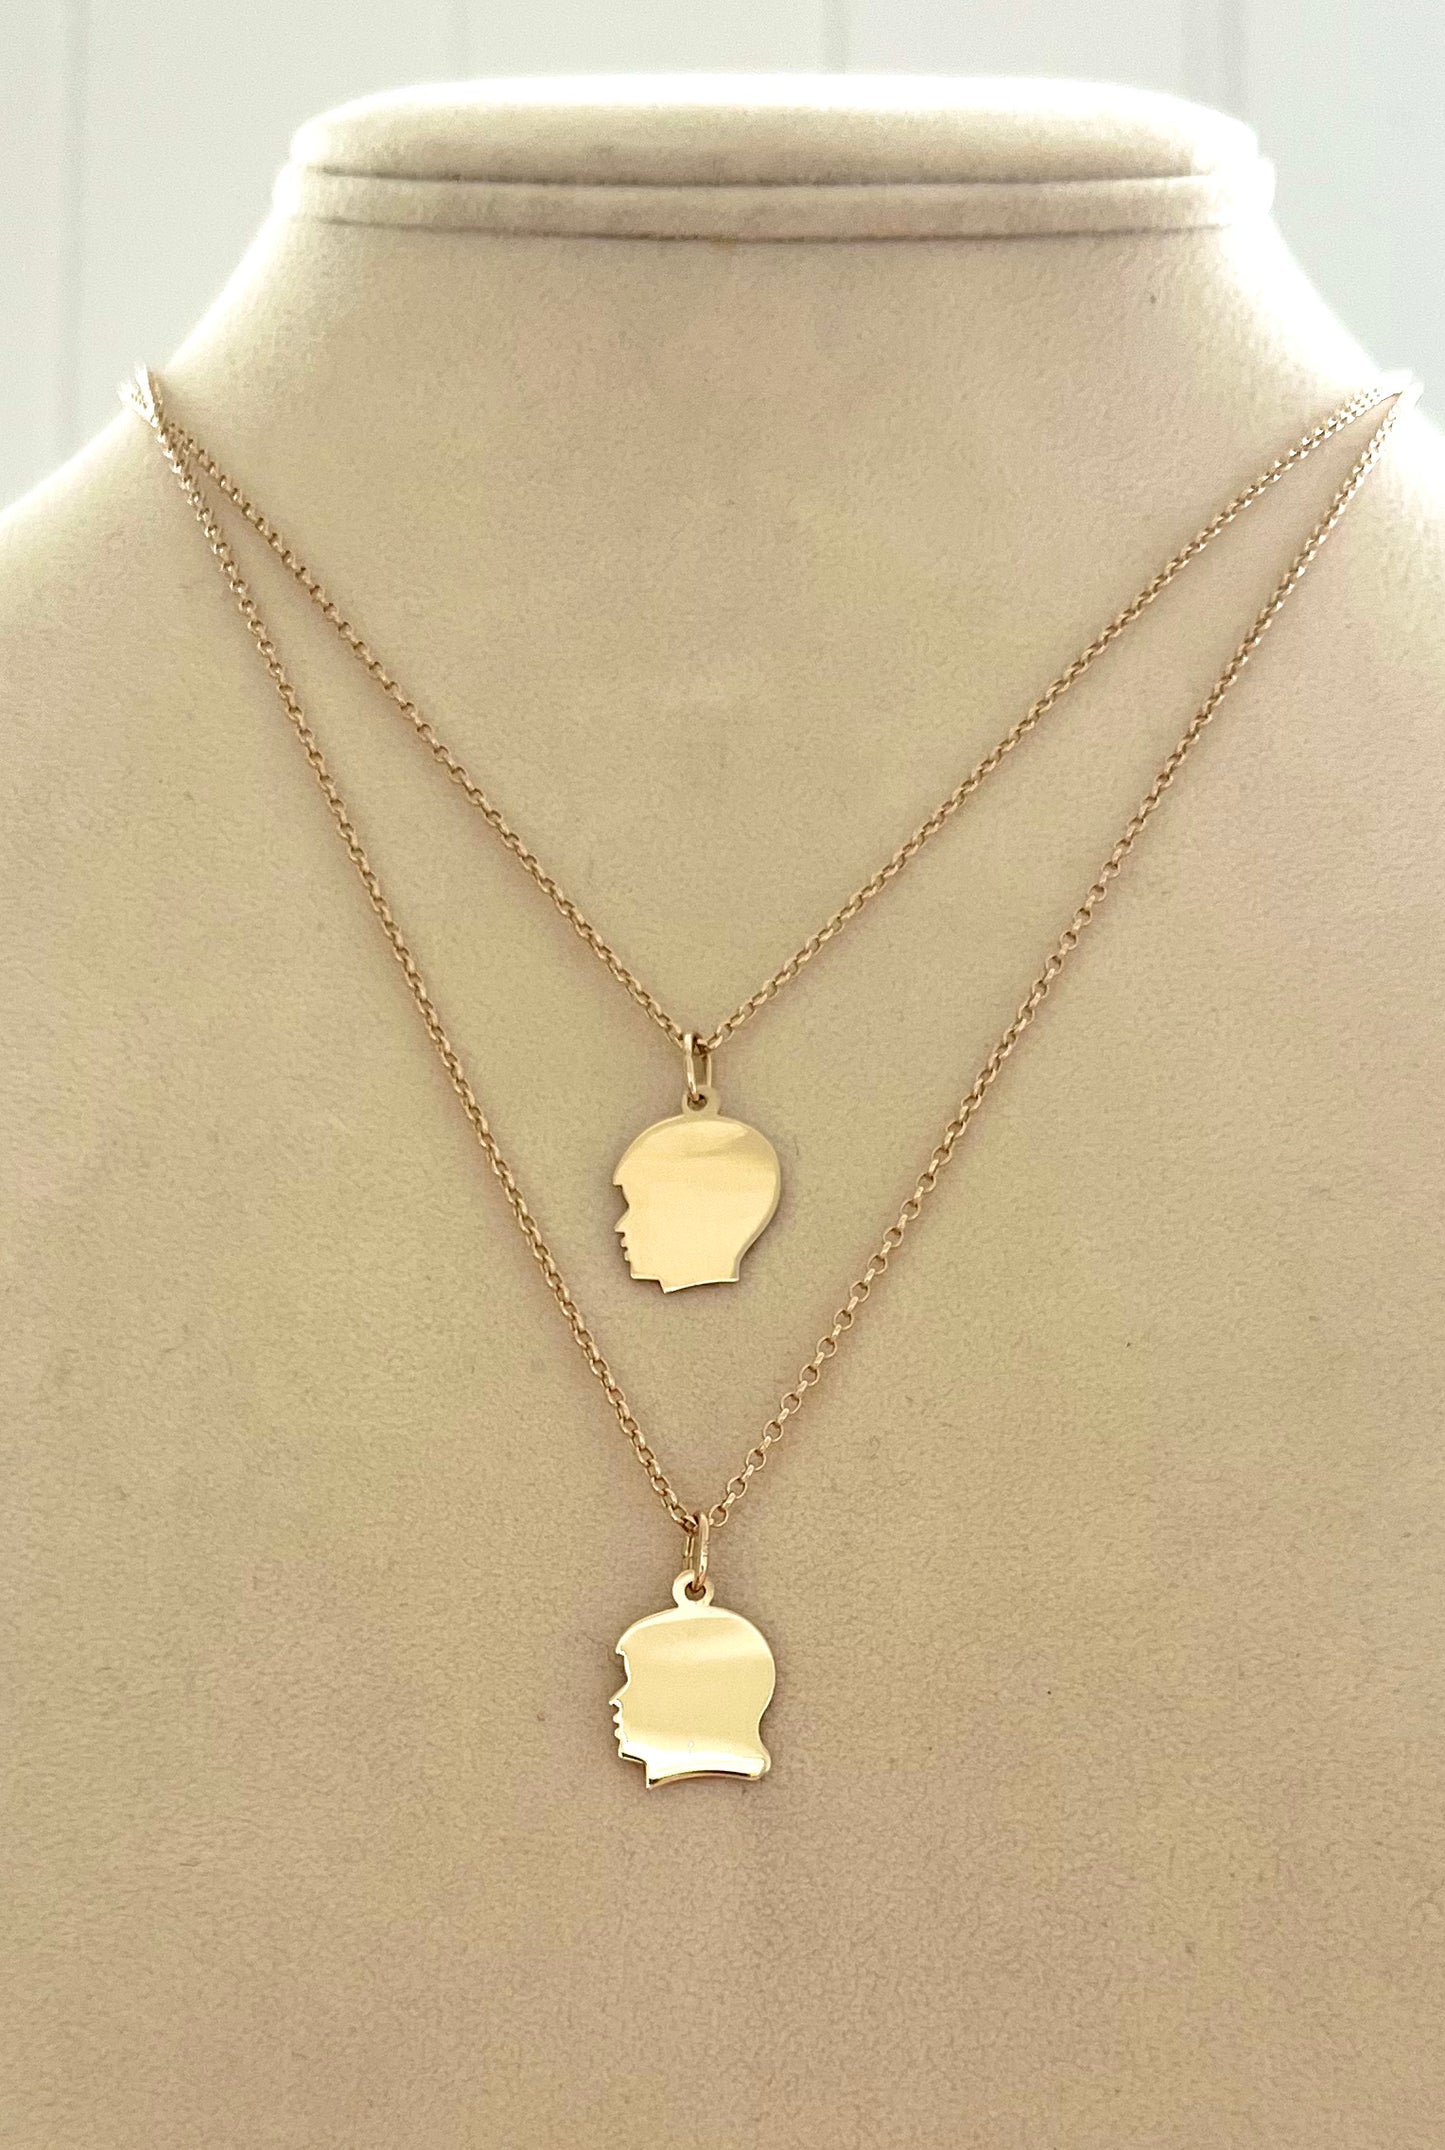 Petite Heirloom Silhouette Necklace 14K Gold